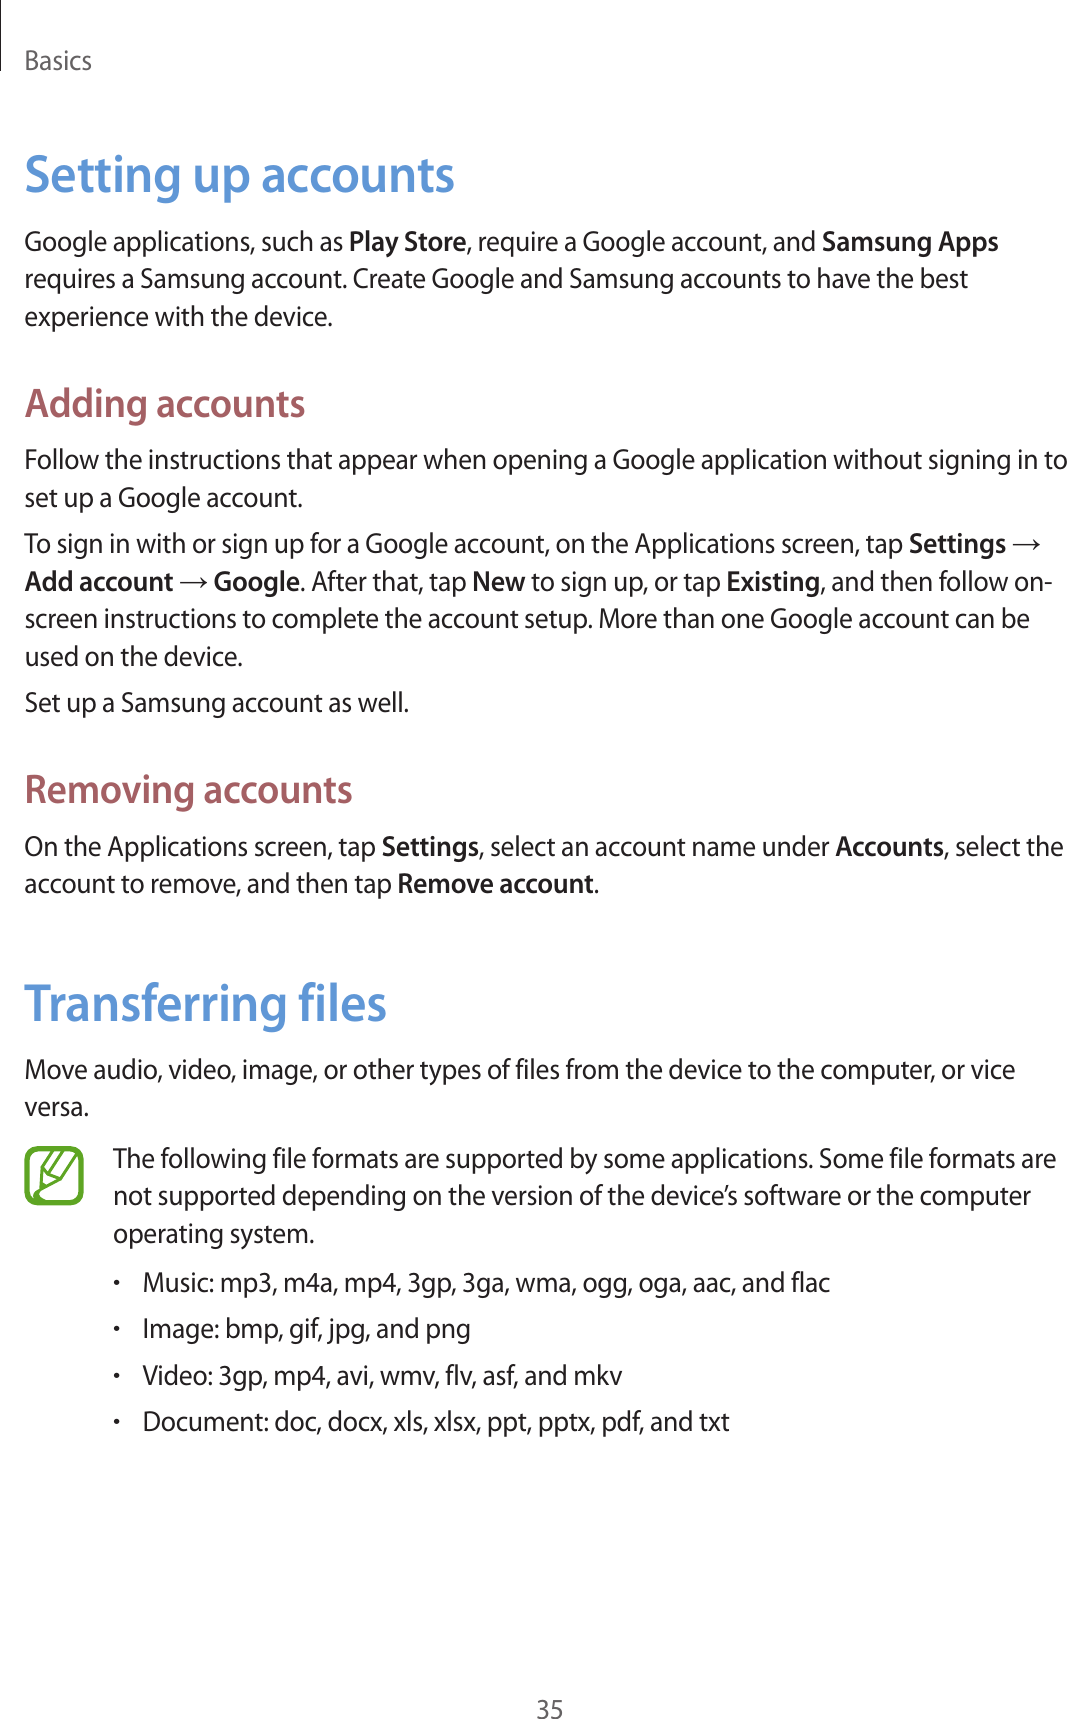 Basics35Setting up accountsGoogle applications, such as Play Store, require a Google account, and Samsung Apps requires a Samsung account. Create Google and Samsung accounts to have the best experience with the device.Adding accountsFollow the instructions that appear when opening a Google application without signing in to set up a Google account.To sign in with or sign up for a Google account, on the Applications screen, tap Settings → Add account → Google. After that, tap New to sign up, or tap Existing, and then follow on-screen instructions to complete the account setup. More than one Google account can be used on the device.Set up a Samsung account as well.Removing accountsOn the Applications screen, tap Settings, select an account name under Accounts, select the account to remove, and then tap Remove account.Transferring filesMove audio, video, image, or other types of files from the device to the computer, or vice versa.The following file formats are supported by some applications. Some file formats are not supported depending on the version of the device’s software or the computer operating system.•Music: mp3, m4a, mp4, 3gp, 3ga, wma, ogg, oga, aac, and flac•Image: bmp, gif, jpg, and png•Video: 3gp, mp4, avi, wmv, flv, asf, and mkv•Document: doc, docx, xls, xlsx, ppt, pptx, pdf, and txt